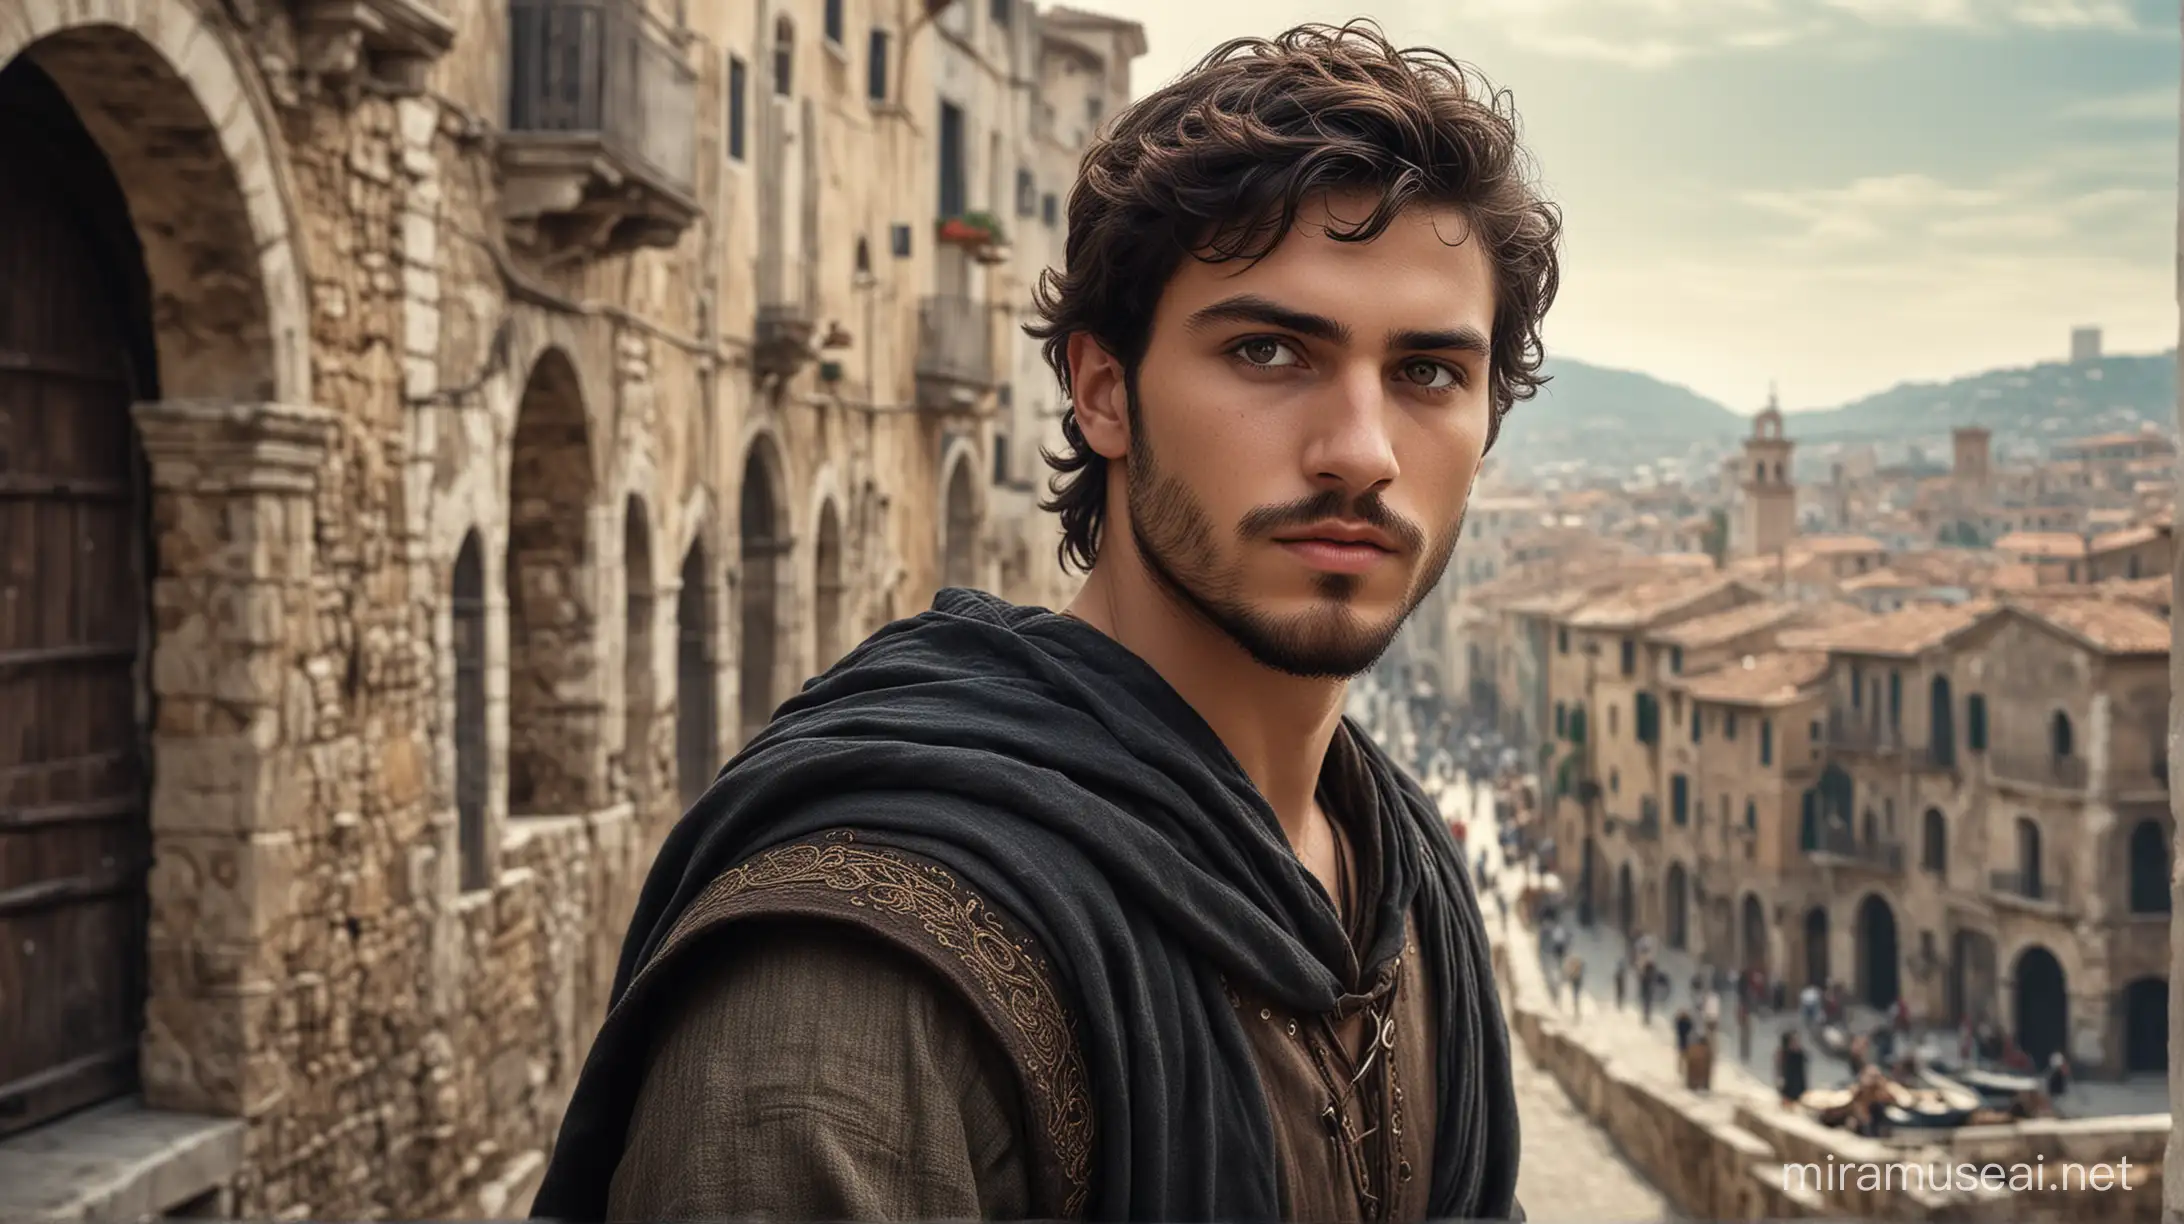 A 22-year-old young thief in Renaissance Italy with a background in a city inspired by Ancient Carthage. The young man wears a darker doublet. He also has a short dark beard. HD image for the cover photo of a story in the genre of epic fantasy.